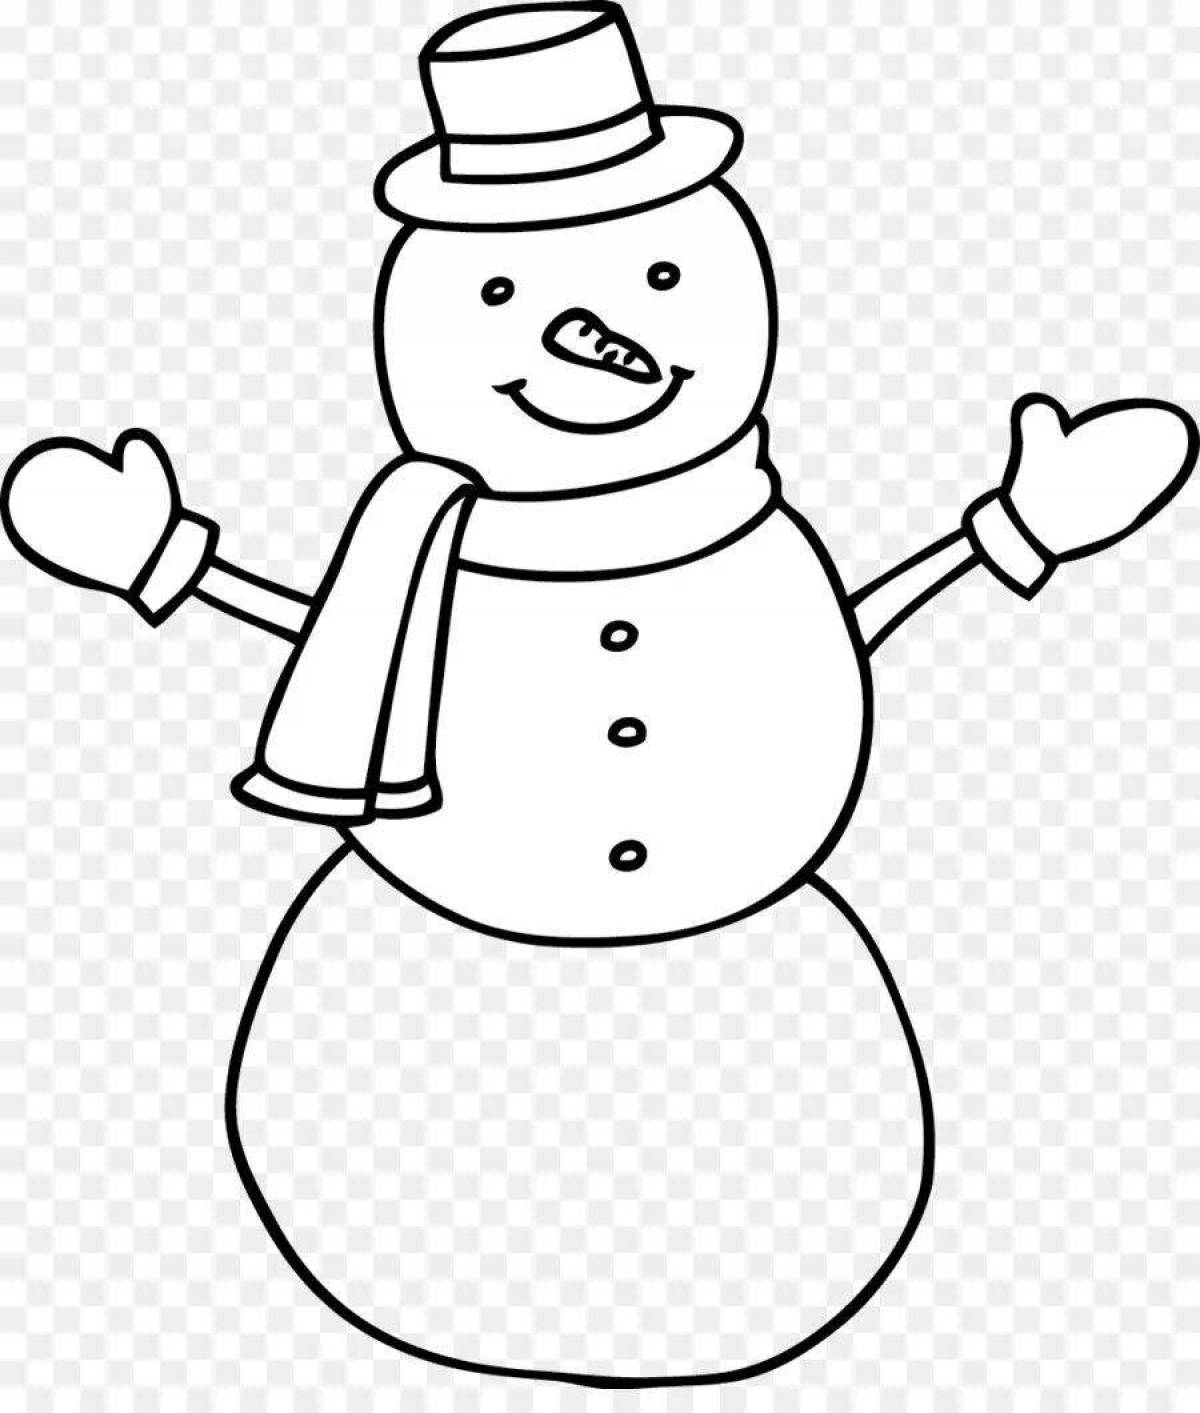 Inspirational snowman drawing for kids